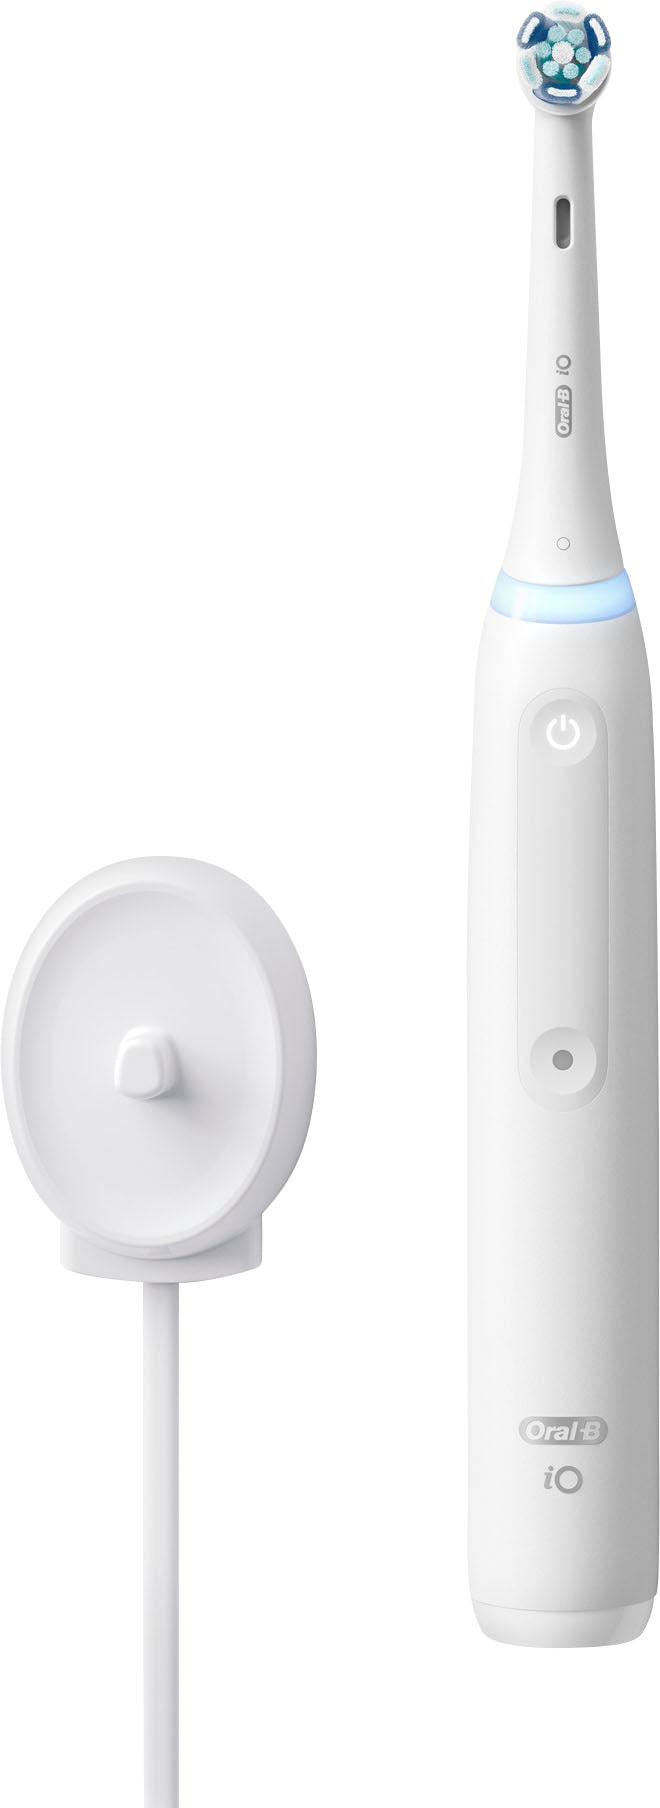 Oral-B - iO Series 3 Electric Toothbrush with (1) Brush Head, Rechargeable, White - White_6